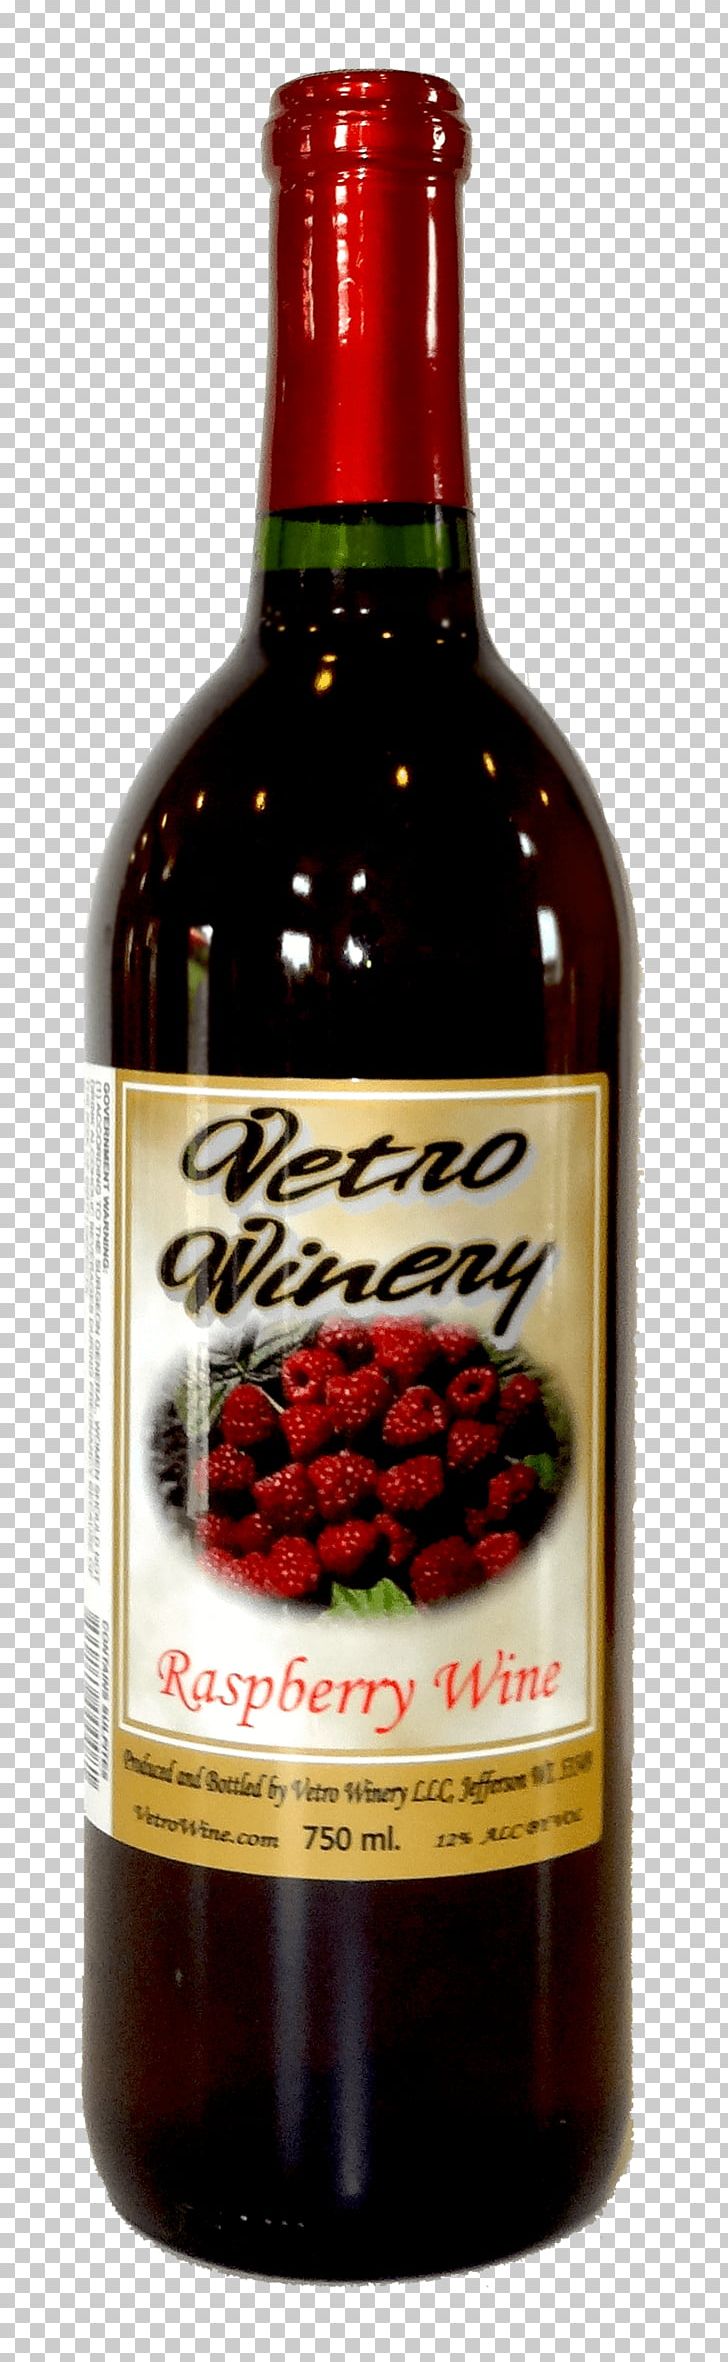 Vetro Winery LLC Distilled Beverage Dessert Wine Liqueur PNG, Clipart, Alcoholic Beverage, Alcoholic Drink, Berry, Blueberry, Bottle Free PNG Download